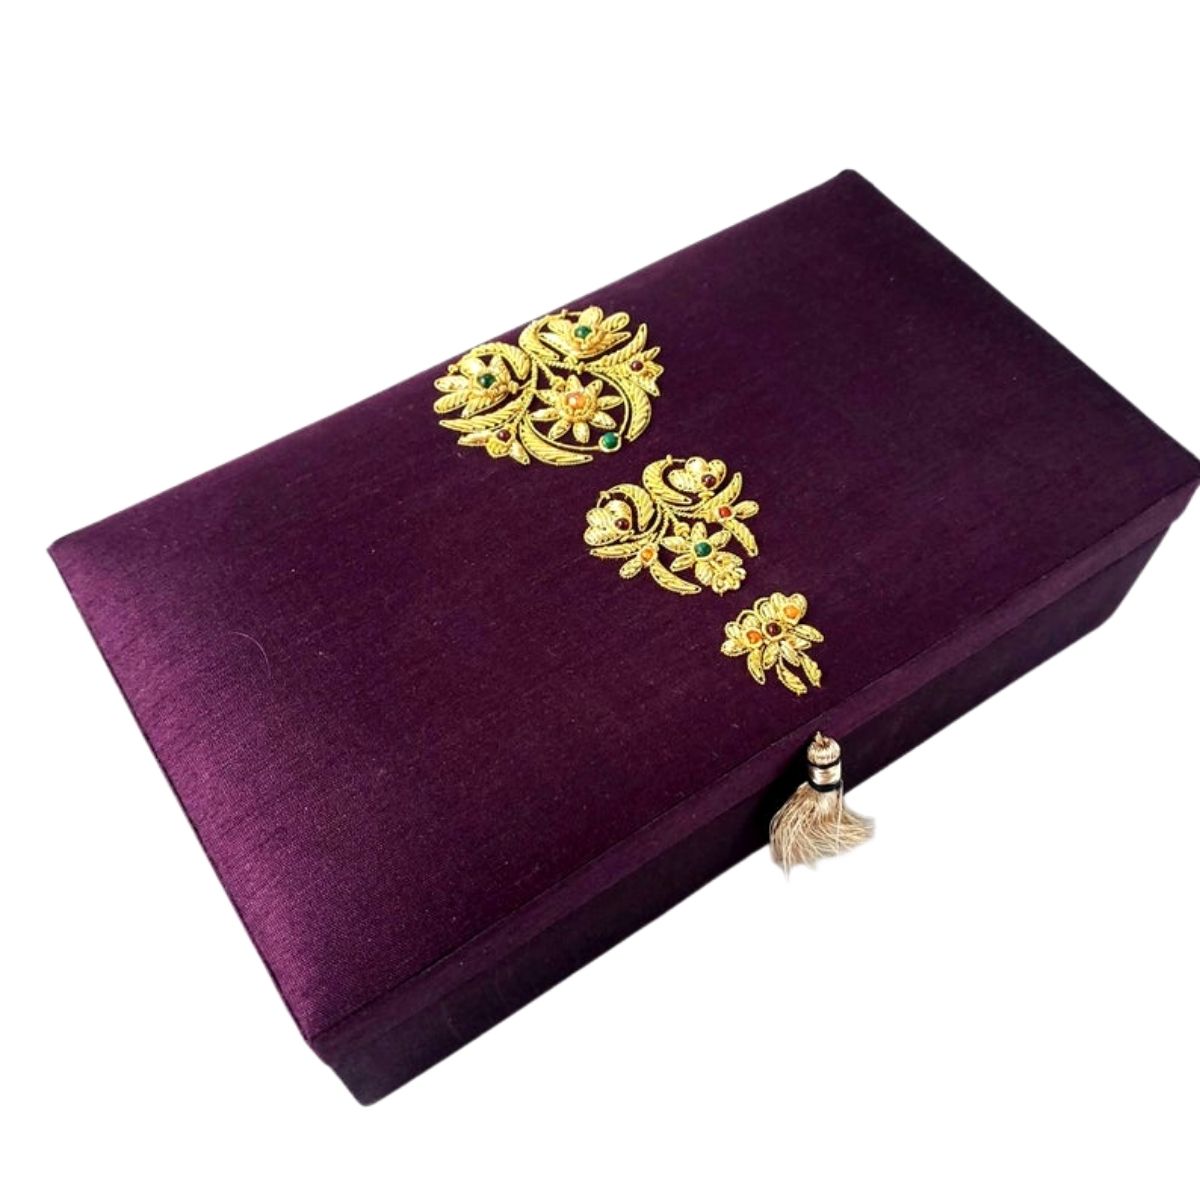 Luxury purple silk blend rectangular jewelry storage box embroidered with gold flowers and embellished with semi precious stones, zardozi box.